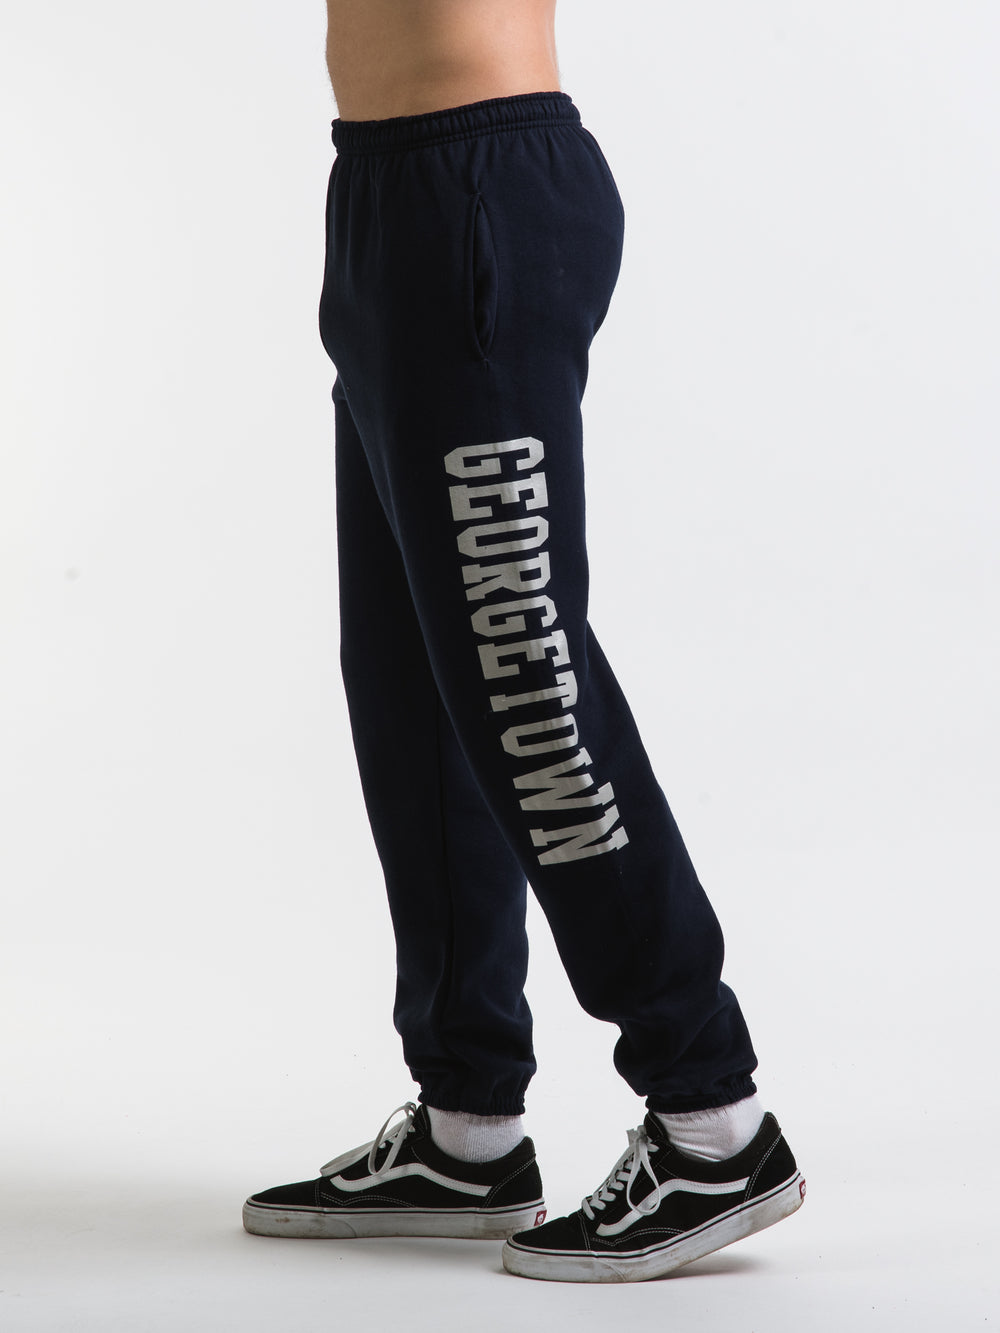 RUSSELL GEORGETOWN SWEAT PANT